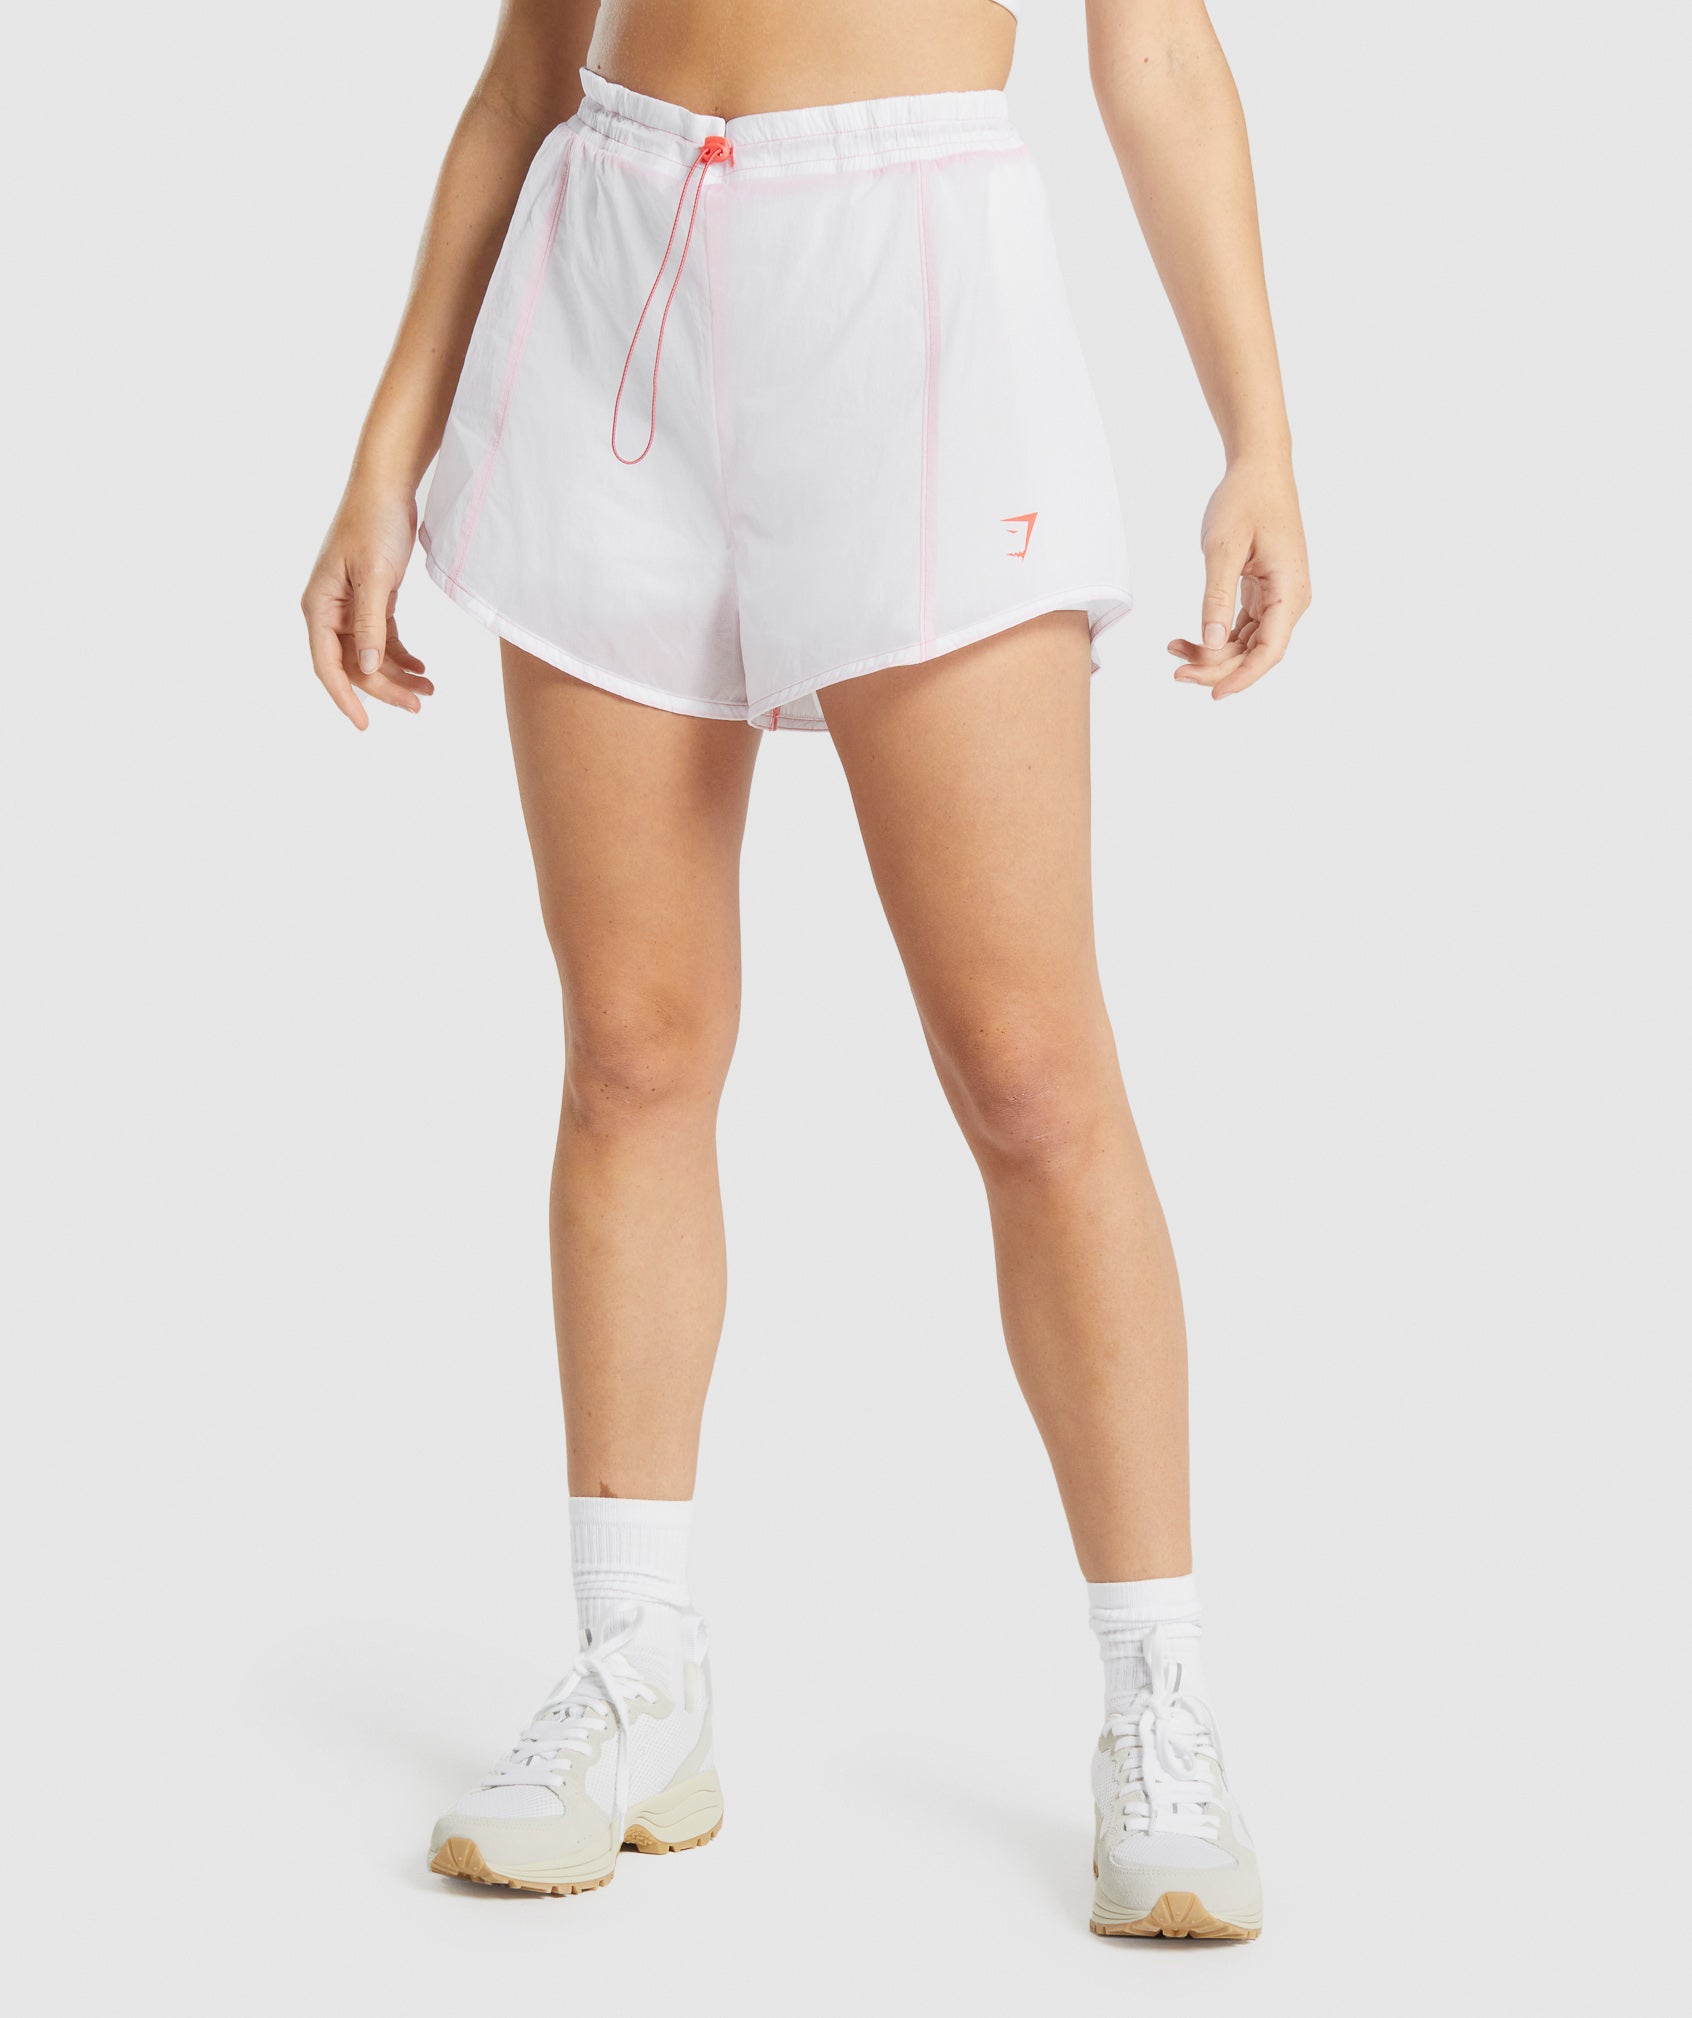 Pulse 2 in 1 Shorts in White - view 1